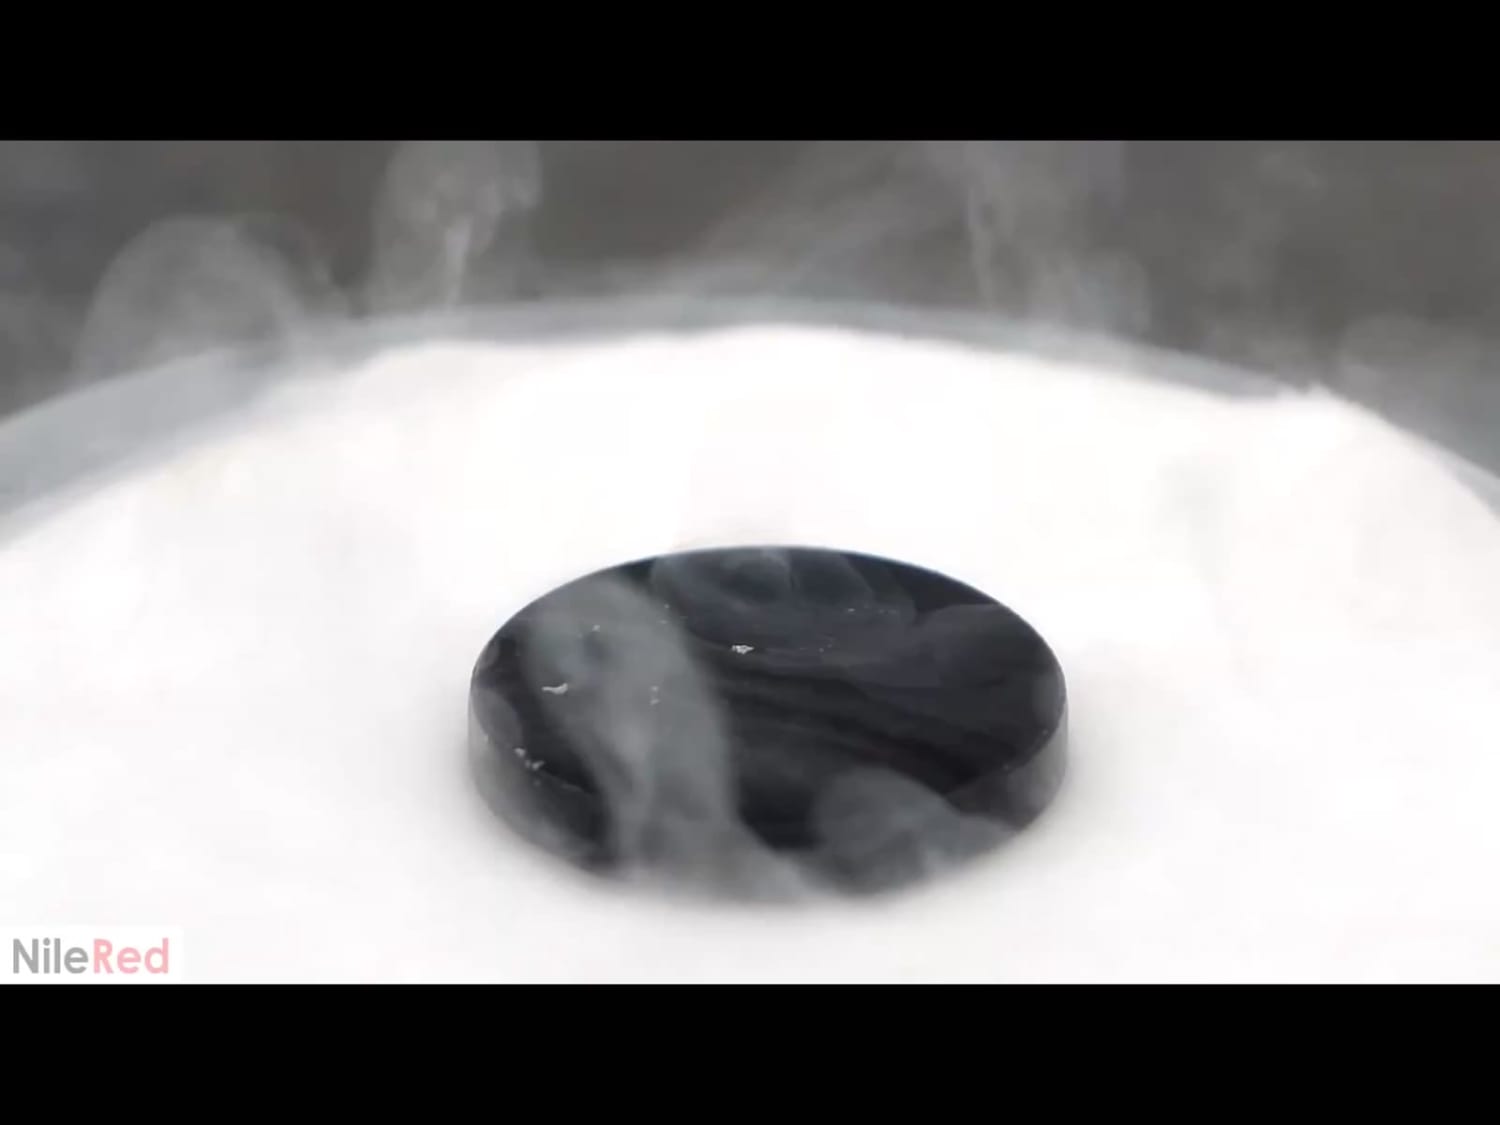 This magnet levitating because of the super conductor